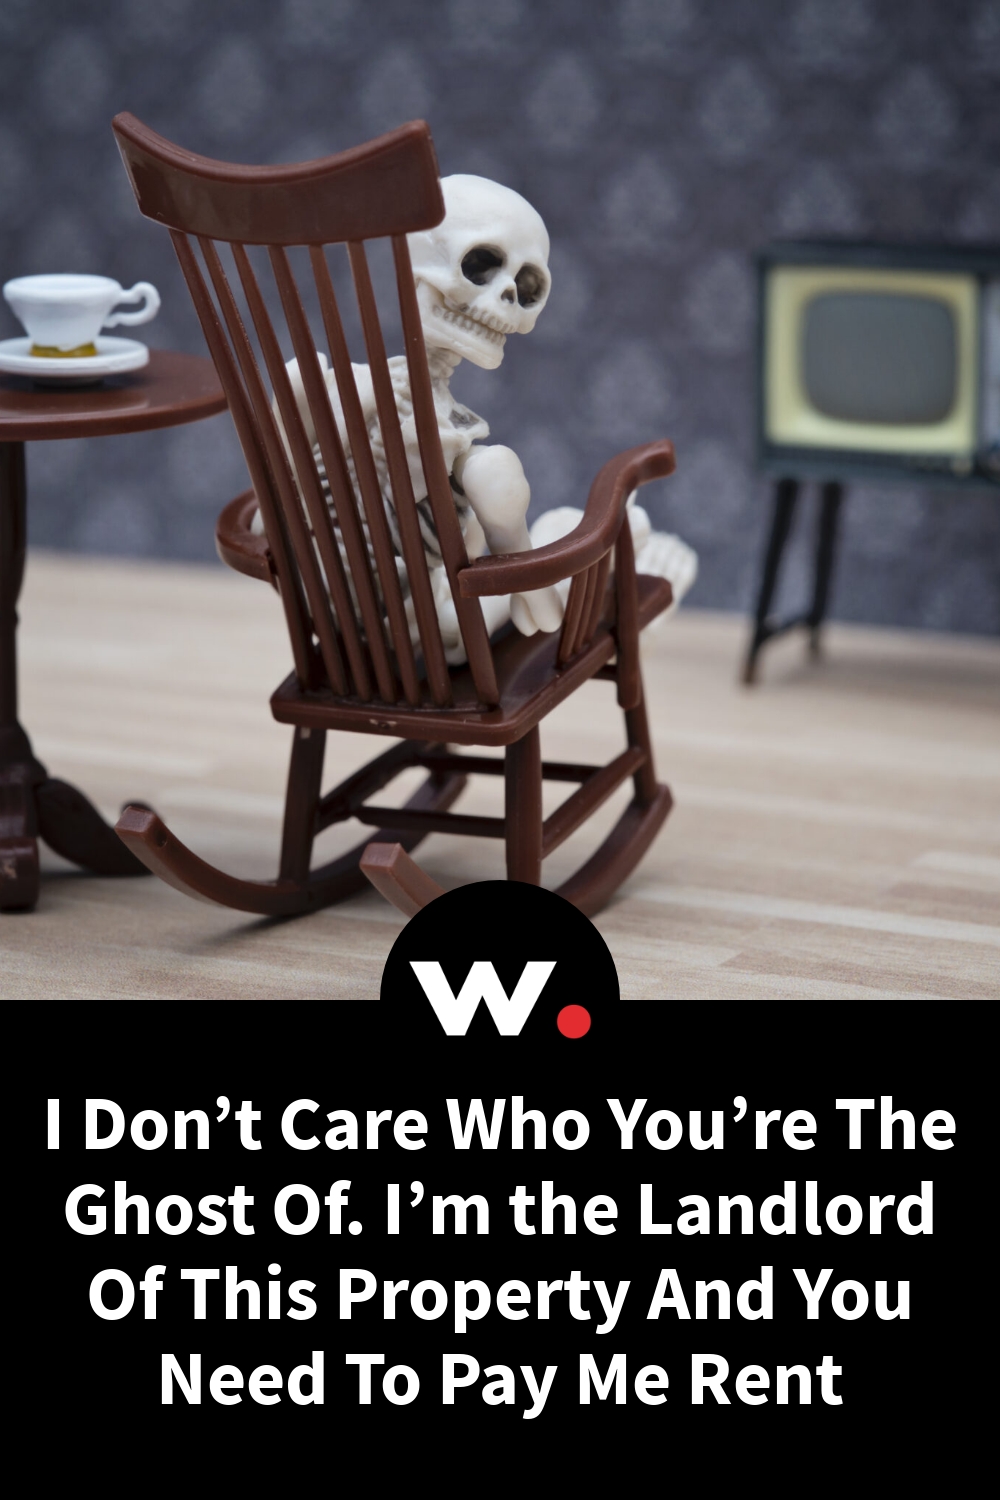 I Don’t Care Who You’re The Ghost Of. I’m the Landlord Of This Property And You Need To Pay Me Rent